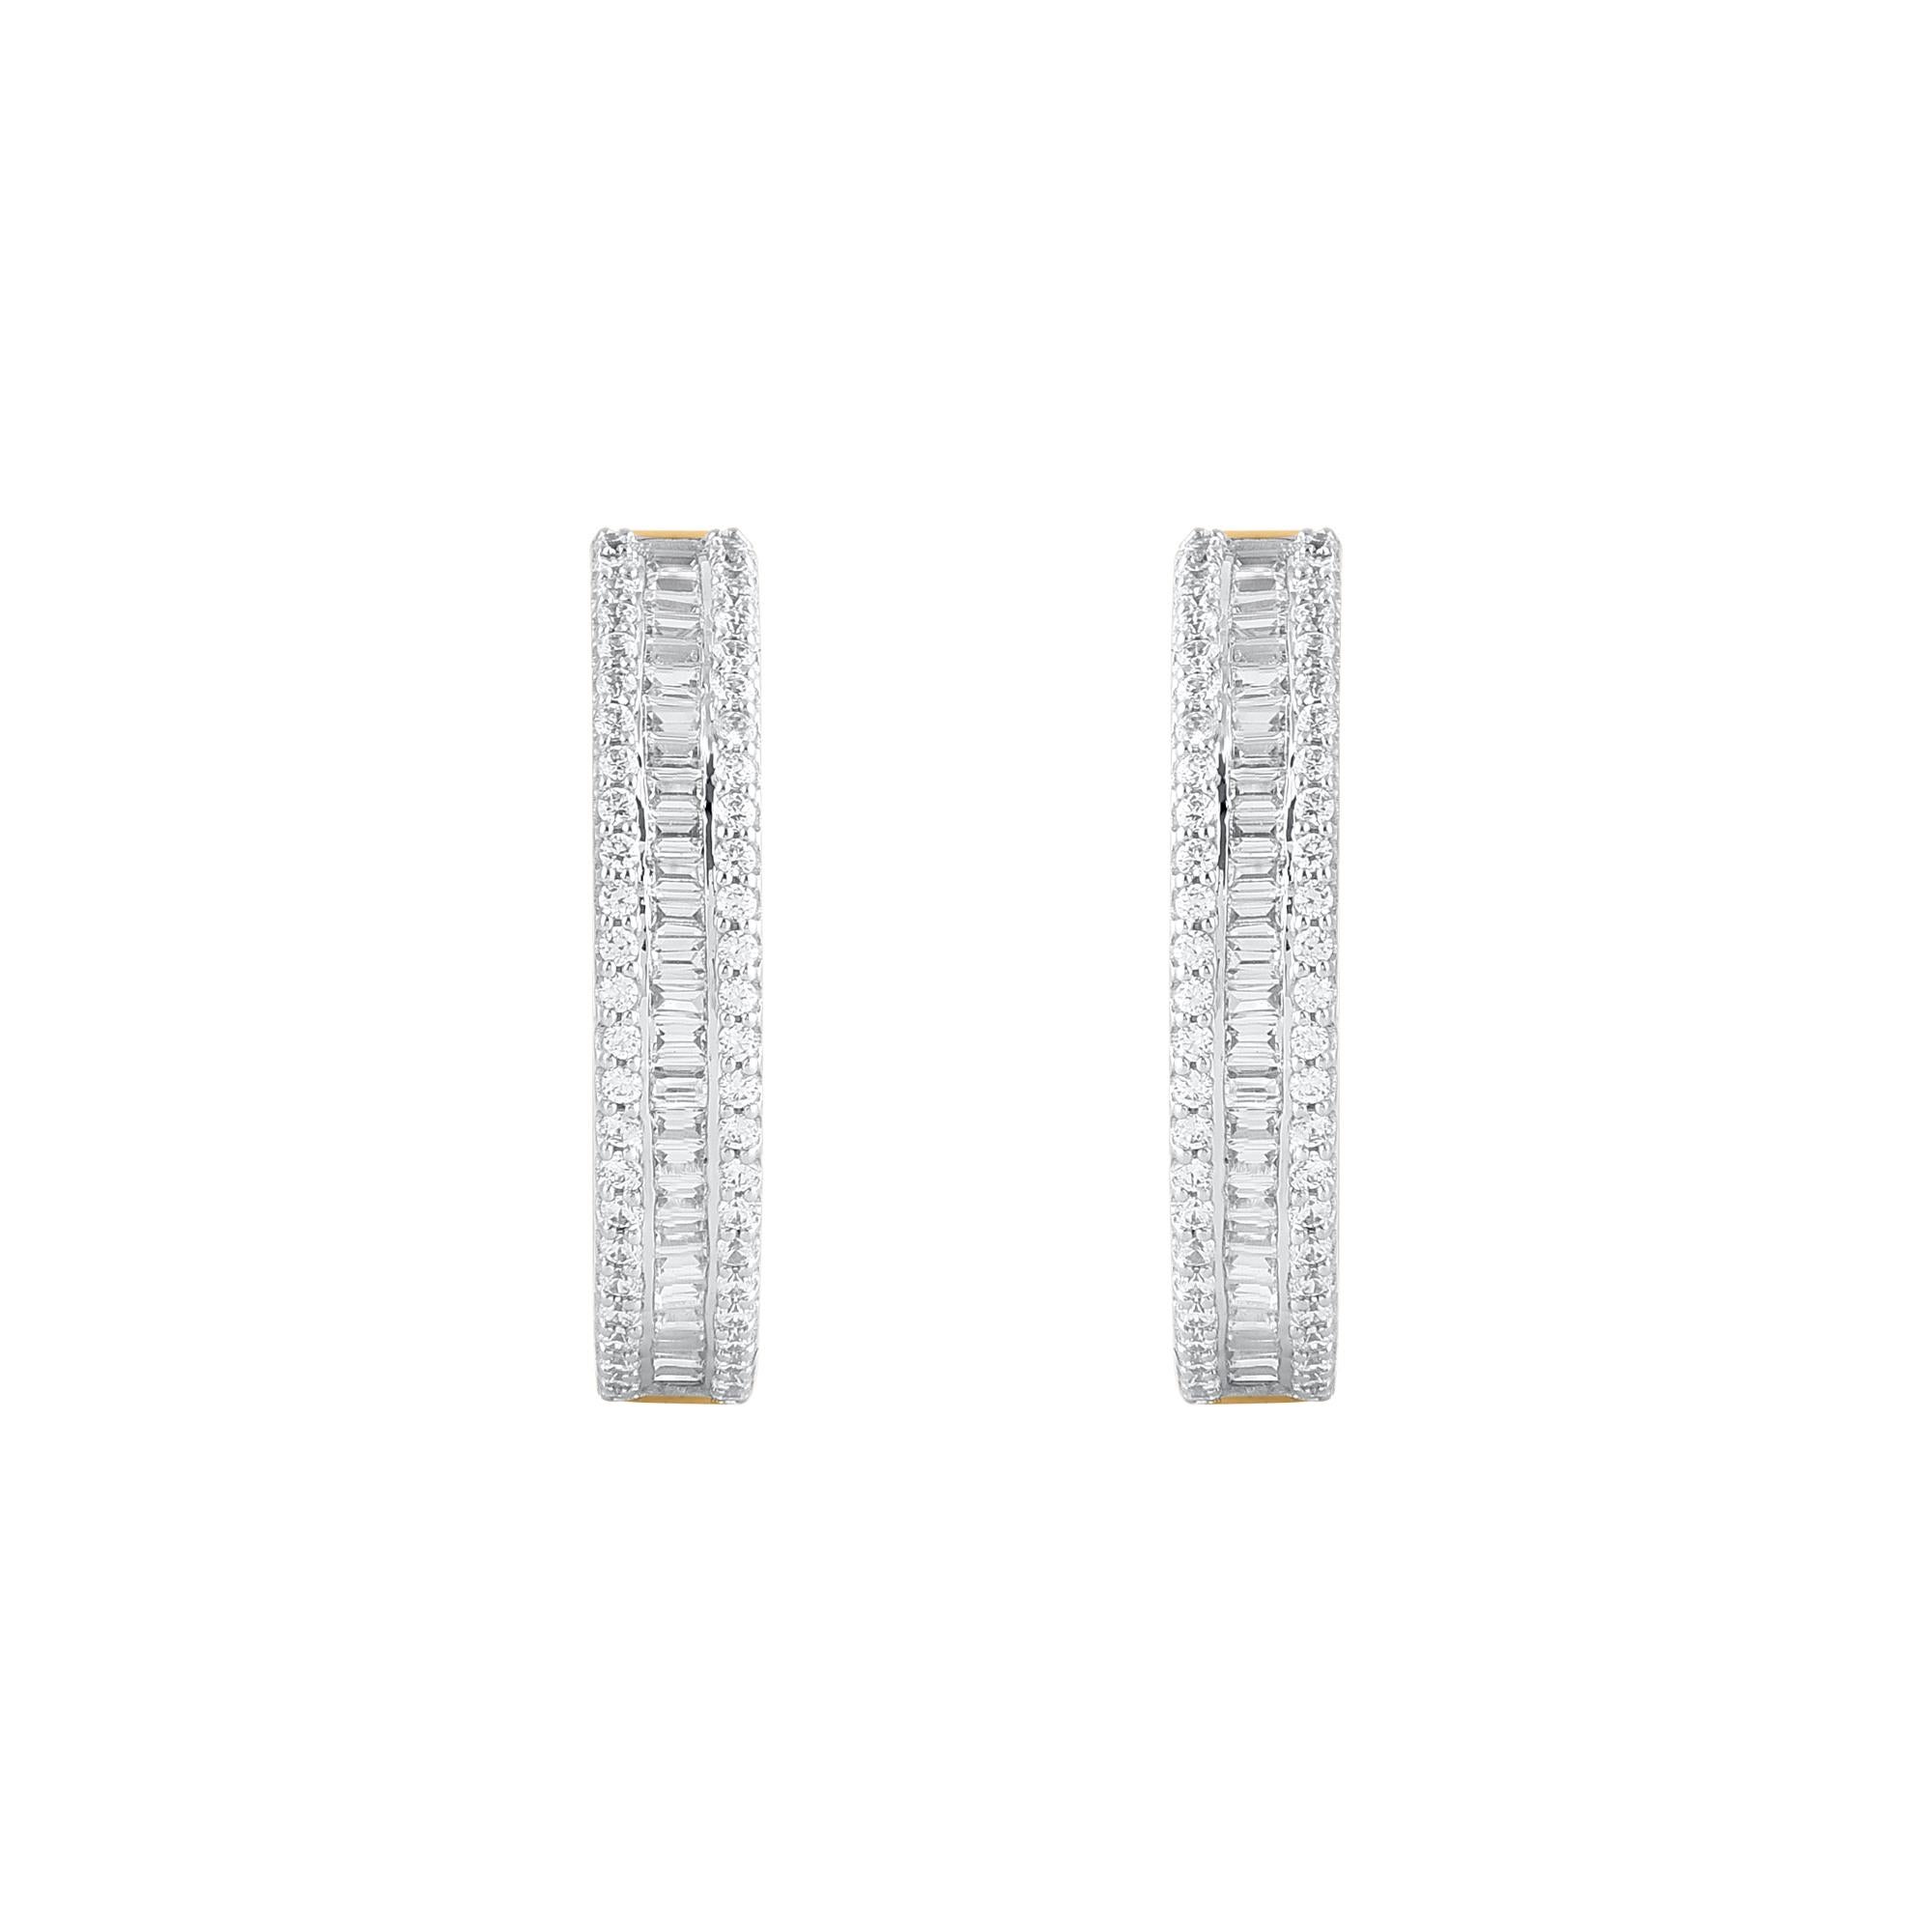 Enhance your day or evening looks when you wear these diamond hoop earrings. Crafted in 14 karat yellow gold with 168 single cut round & baguette diamond in prong & channel setting. Total diamond weight is 1.0 carat. These earrings secure with